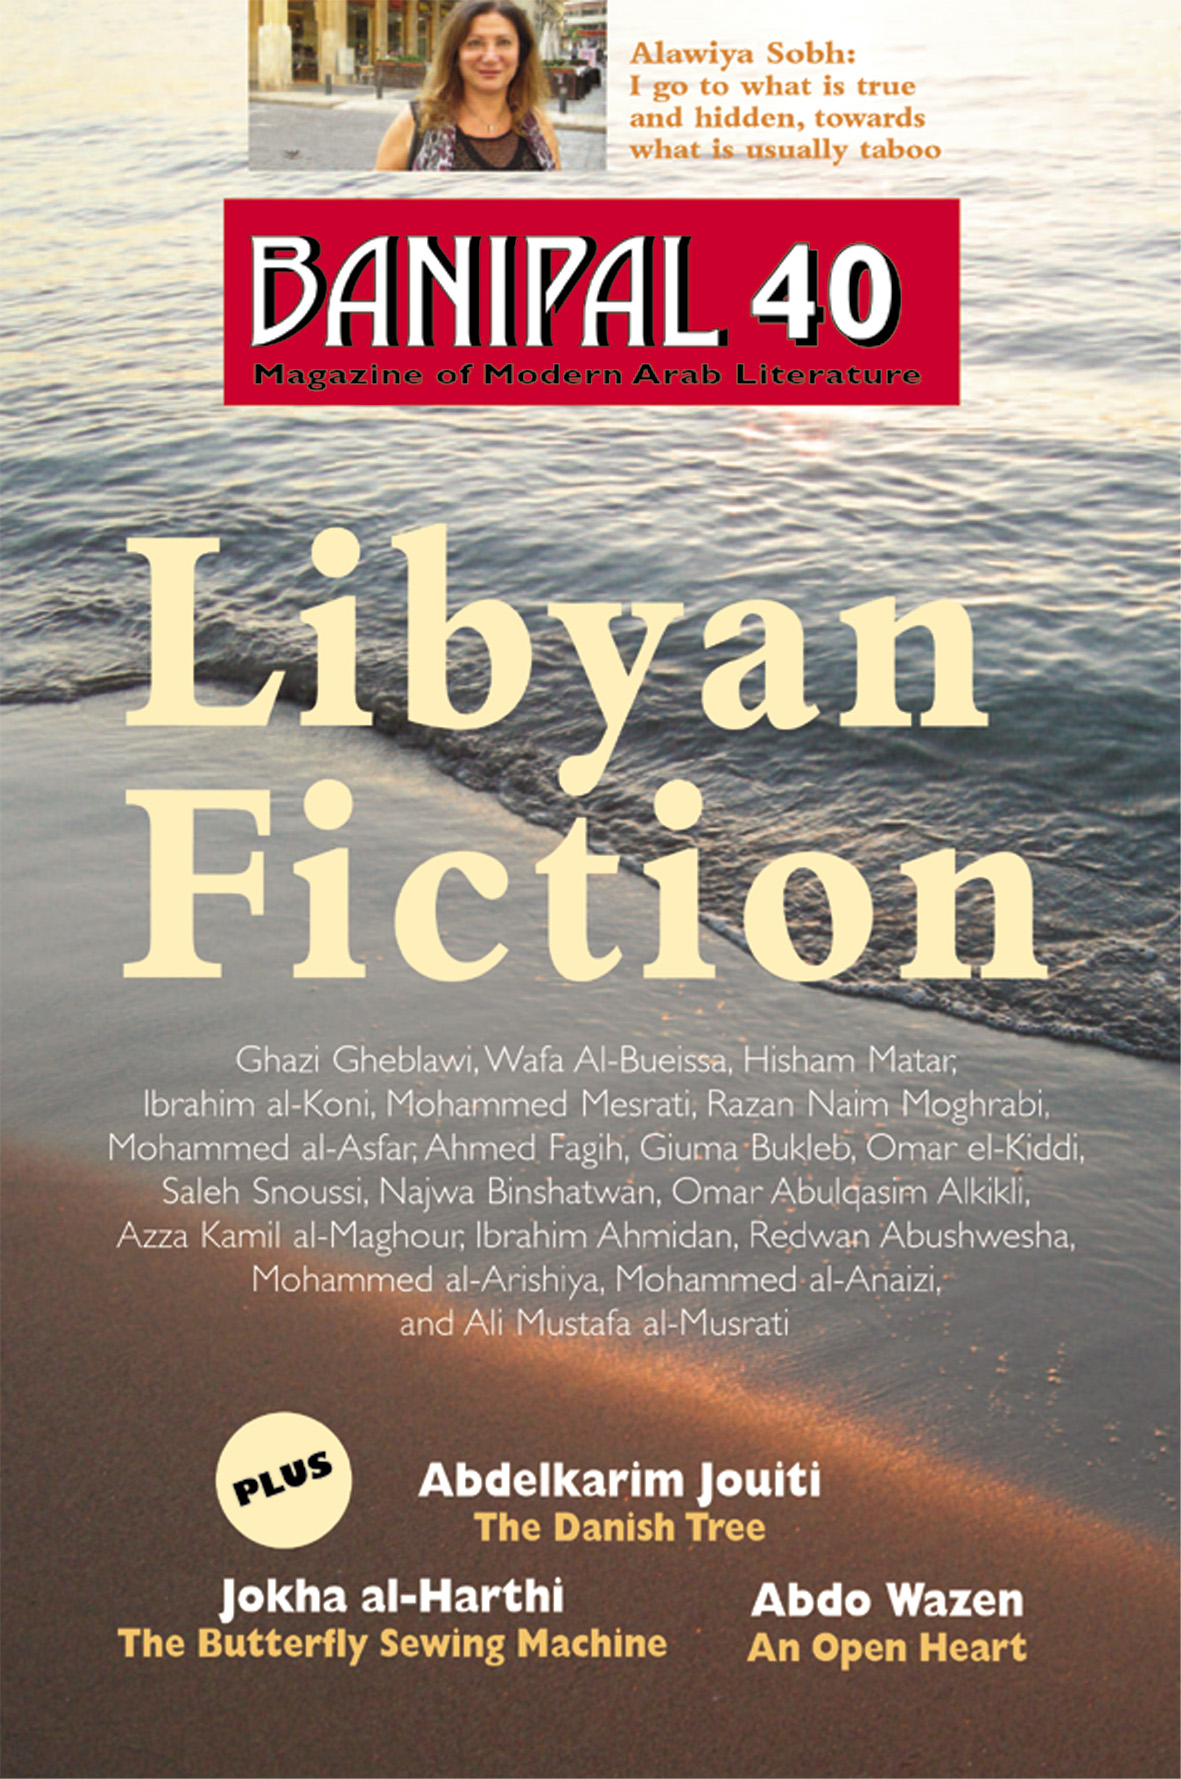 Front cover of Banipal 40 – Libyan Fiction